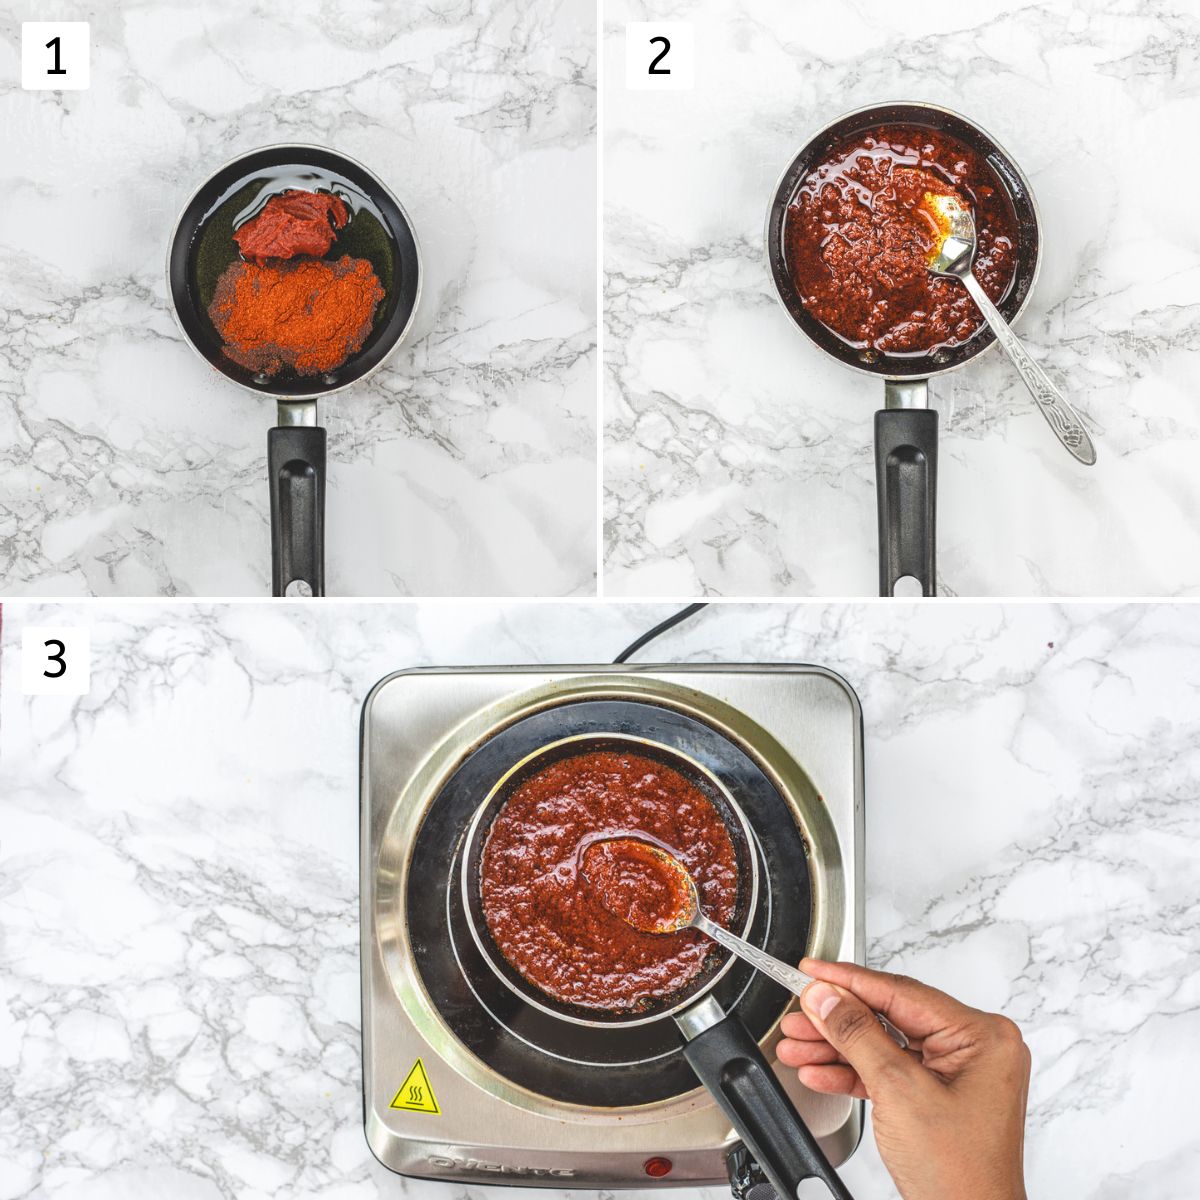 Collage of 3 images showing mixing topping ingredients and heating on the stove.